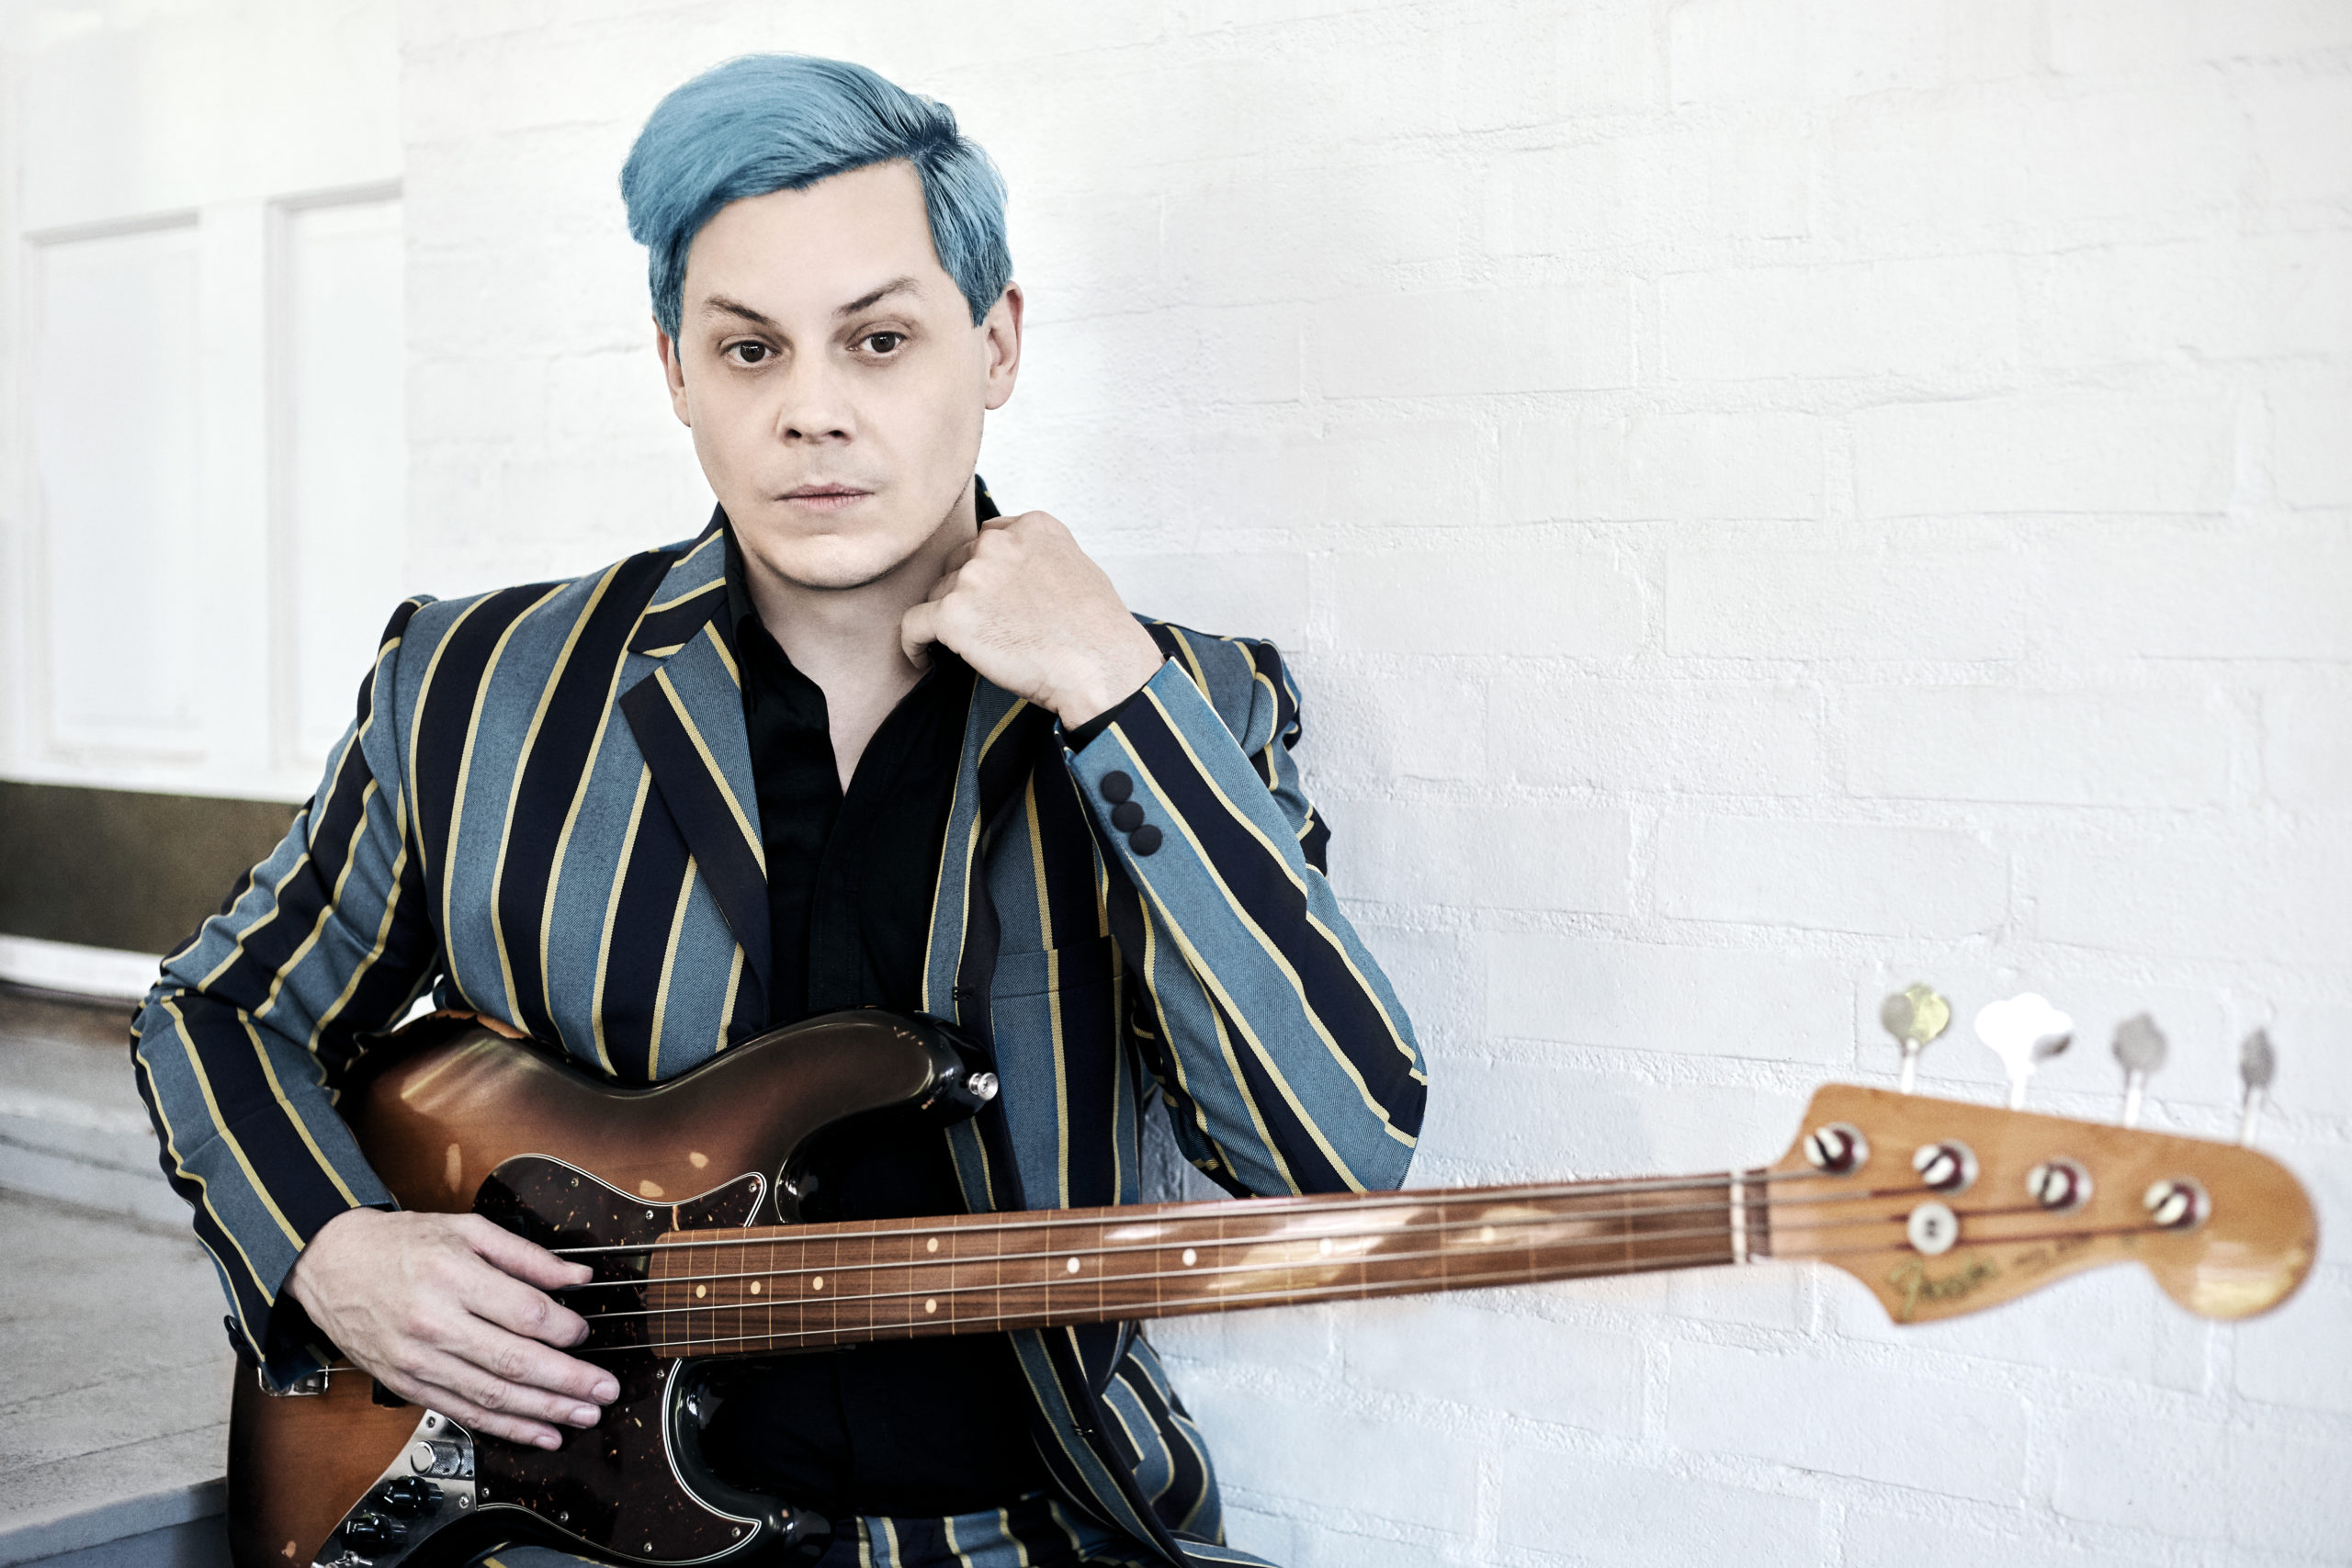 Jack White Releases New Single “Taking Me Back,” Marking First New Music in 3+ Years